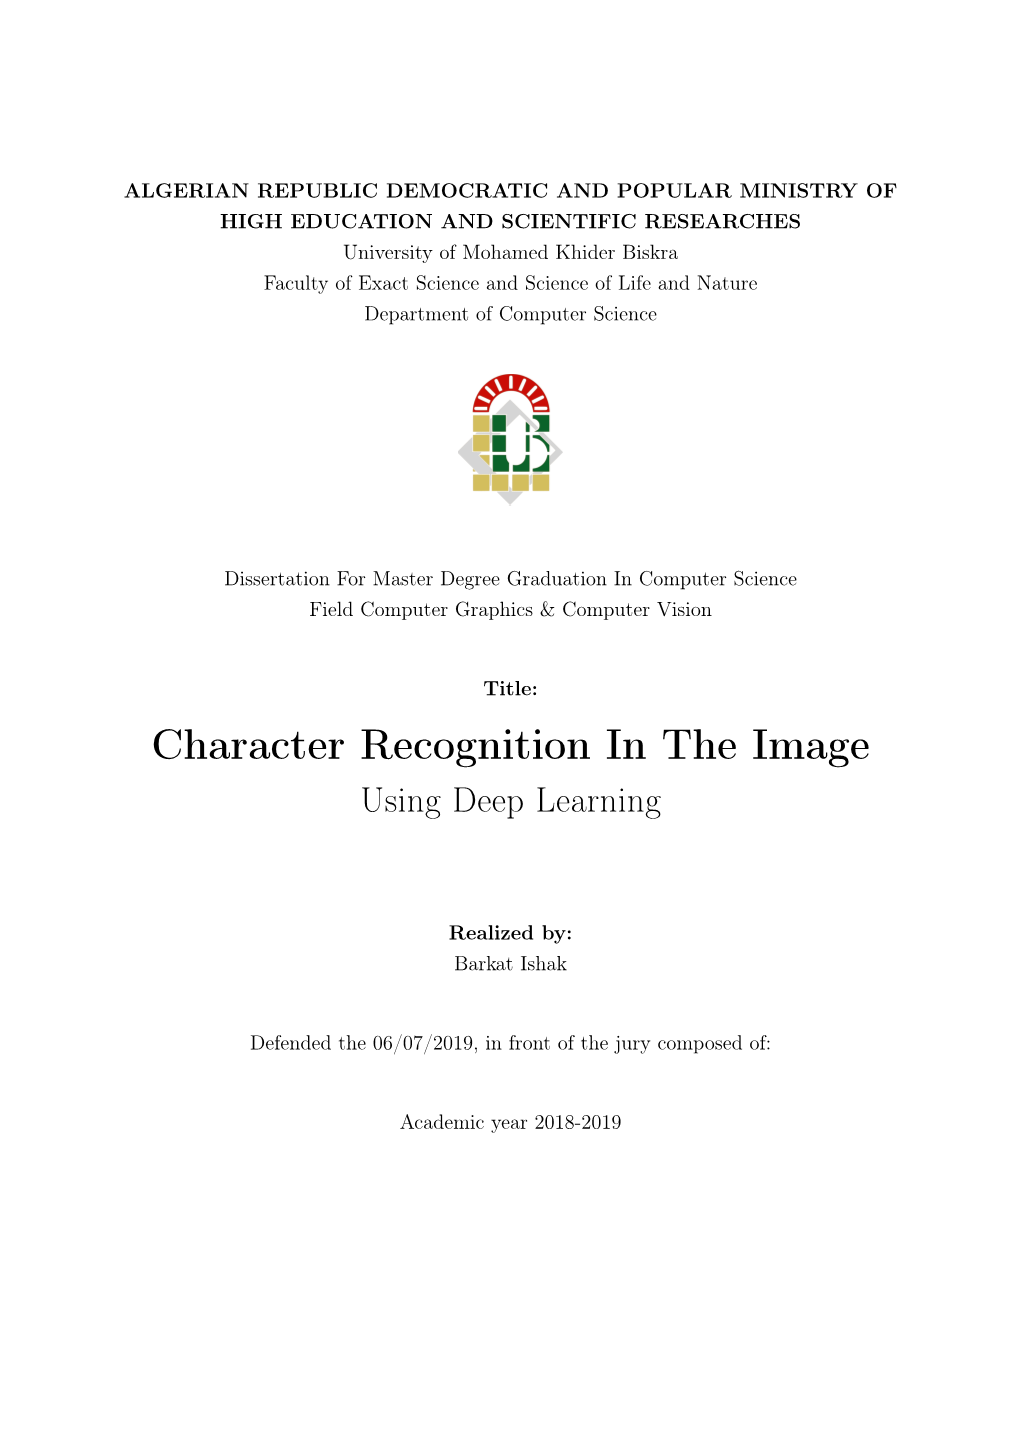 Character Recognition in the Image Using Deep Learning